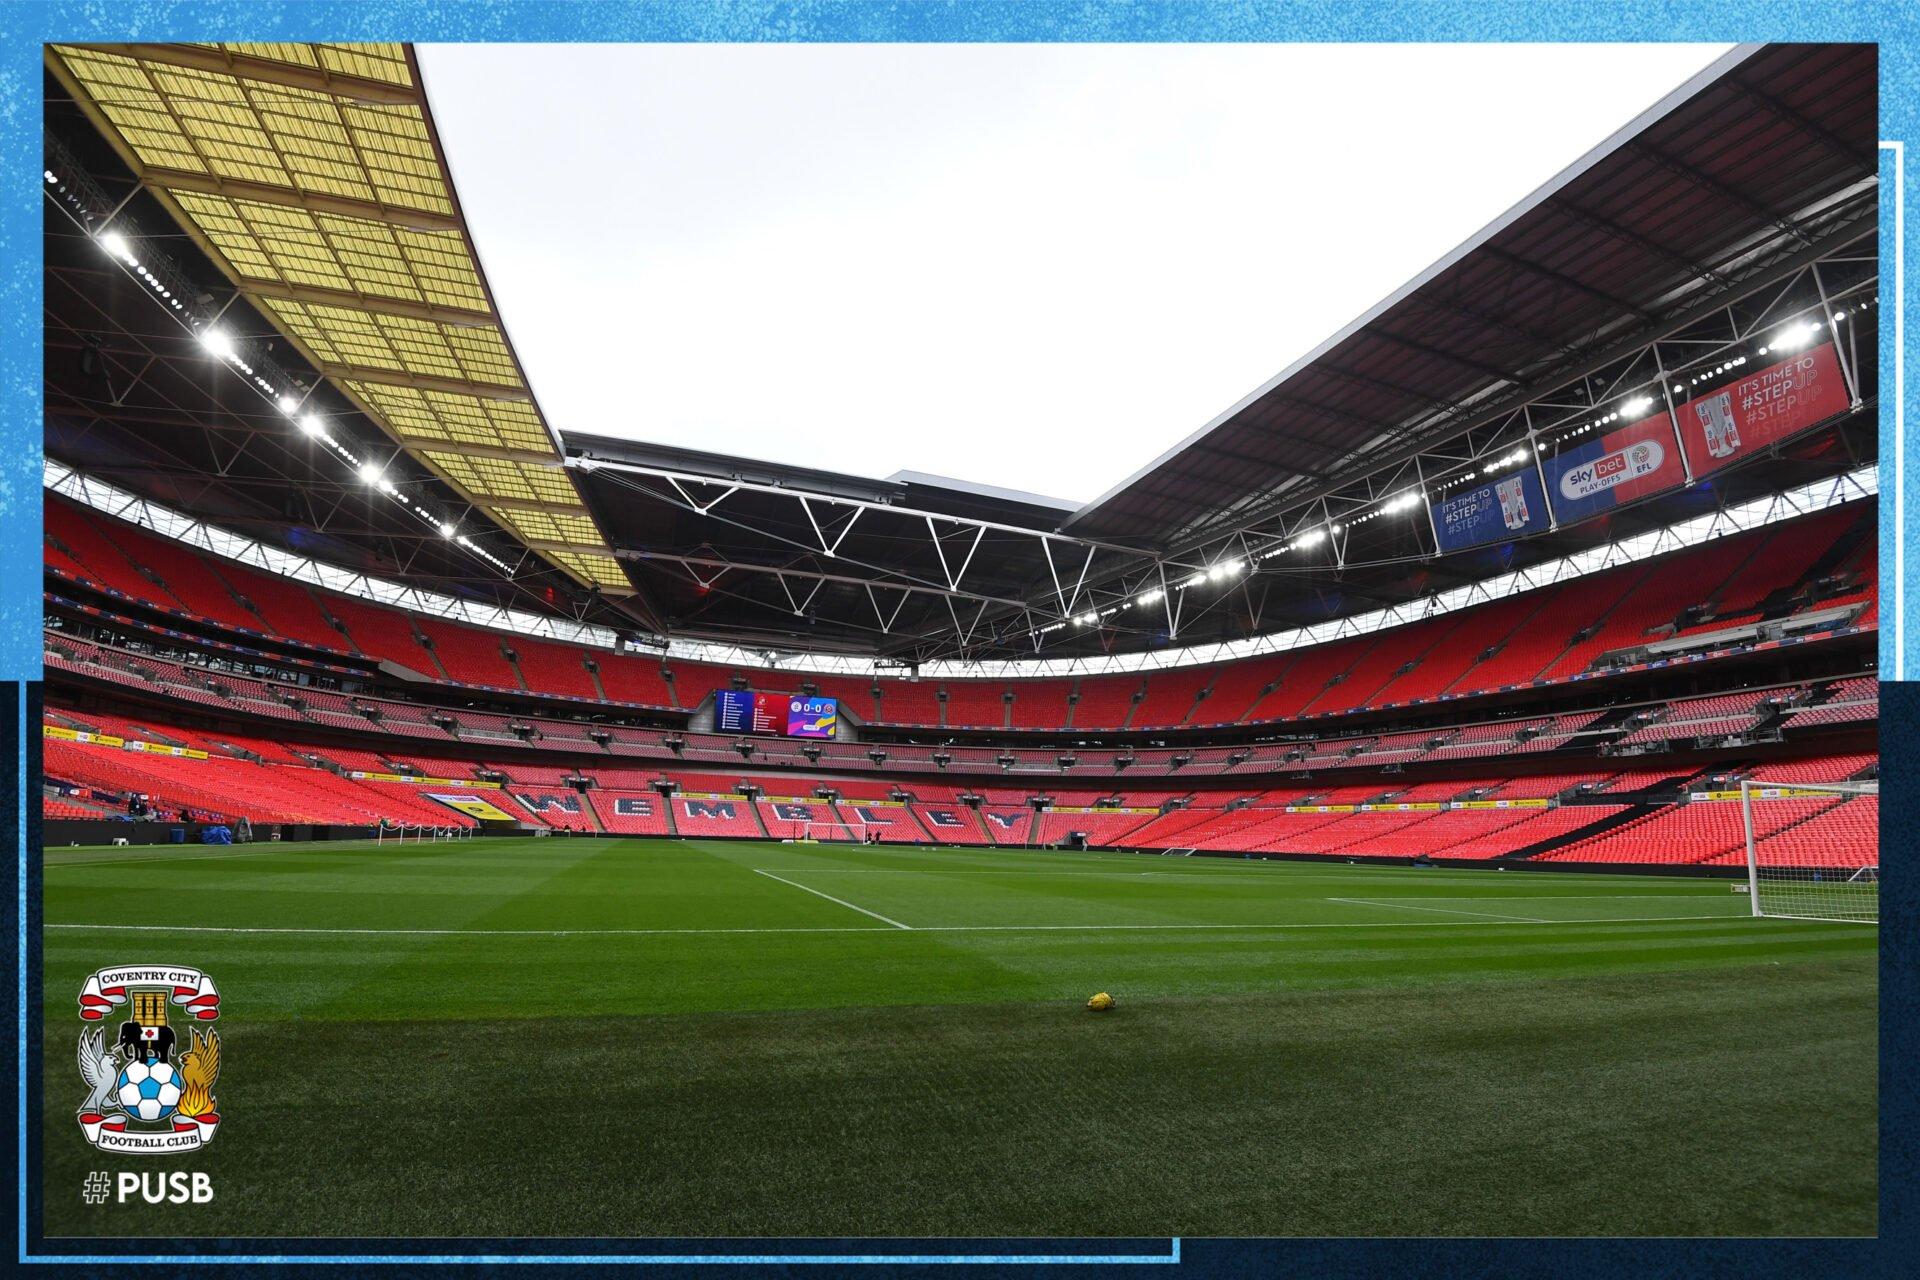 Coventry City x Luton Town - Wembley